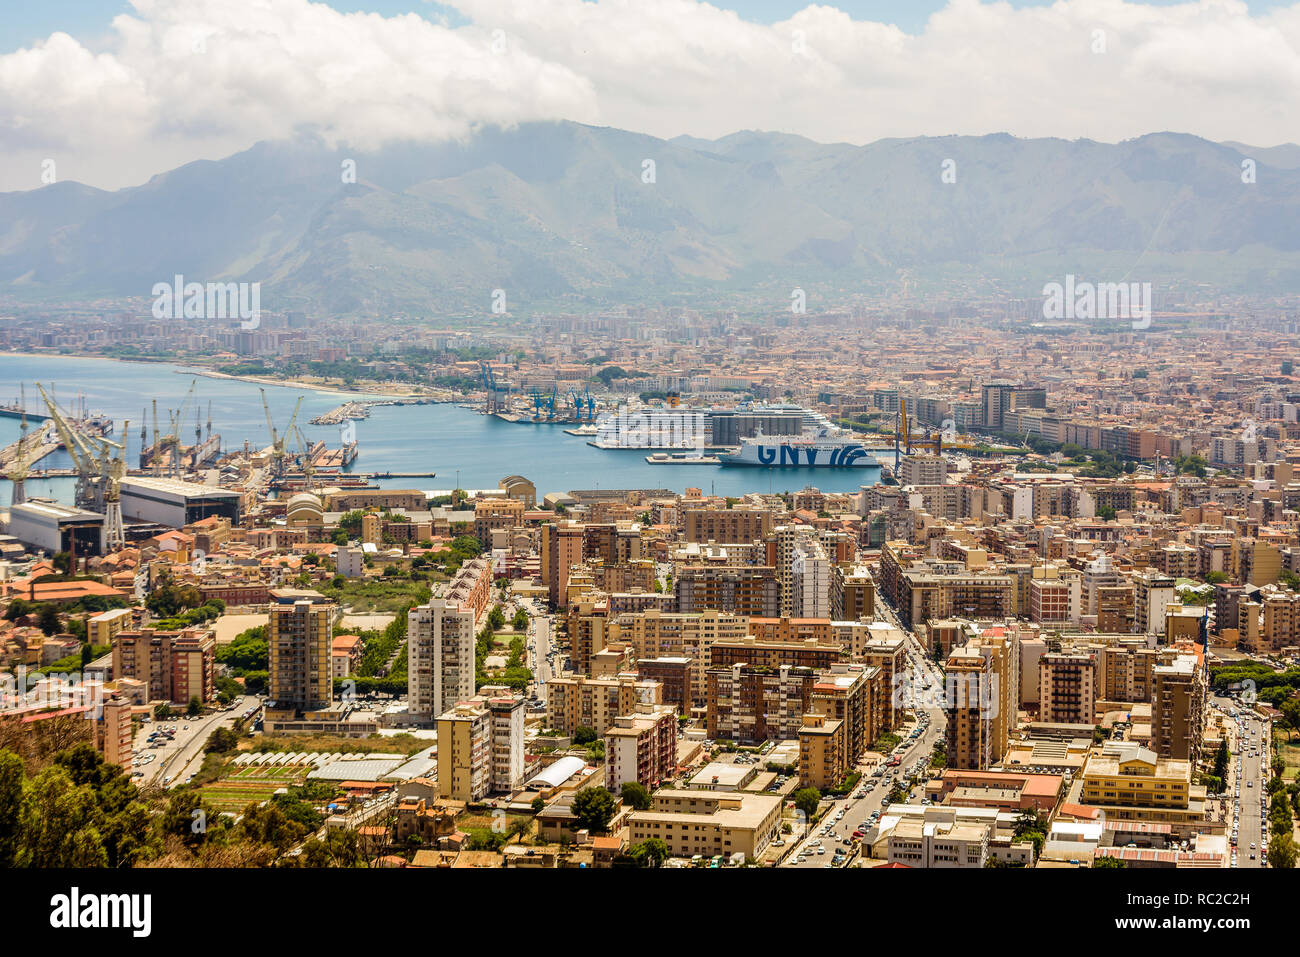 Aerial view of the Port of Palermo, Sicily, with GNV (Grandi Navi Veloci) and Costa Crociere ships. Sicily, Italy. Stock Photo